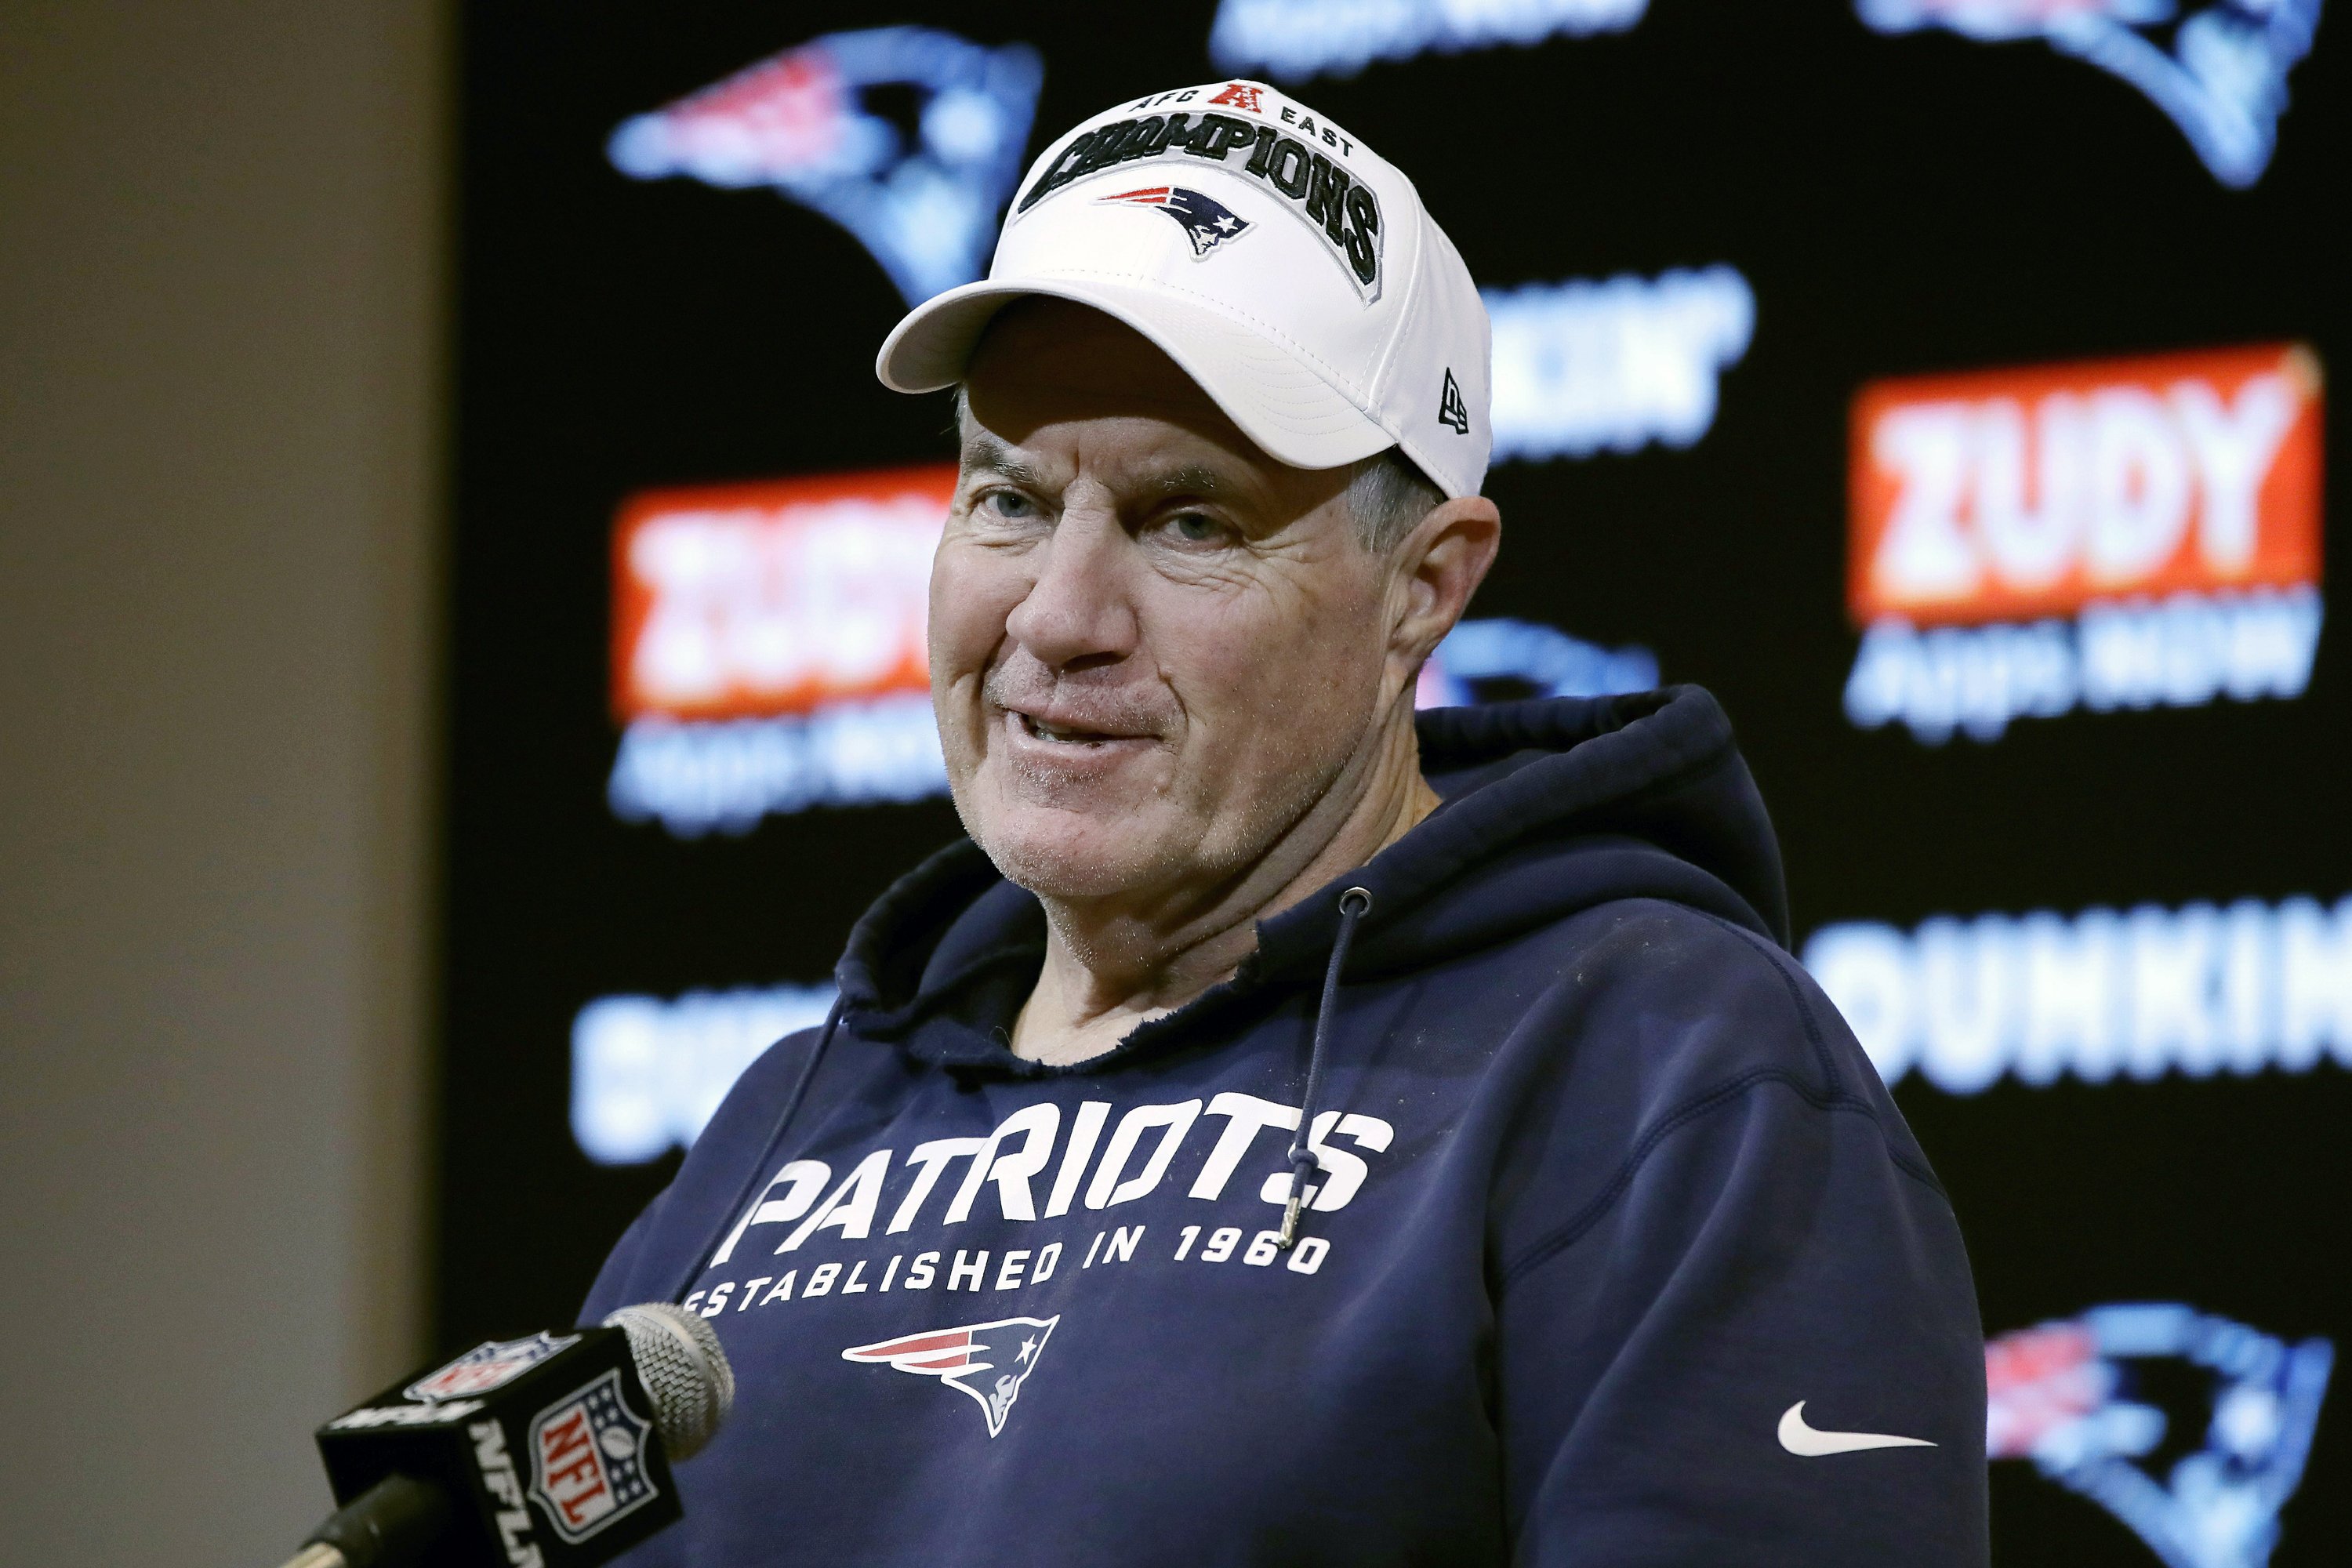 Patriots trade out of 1st round, could make 5 picks on Day 2 AP News